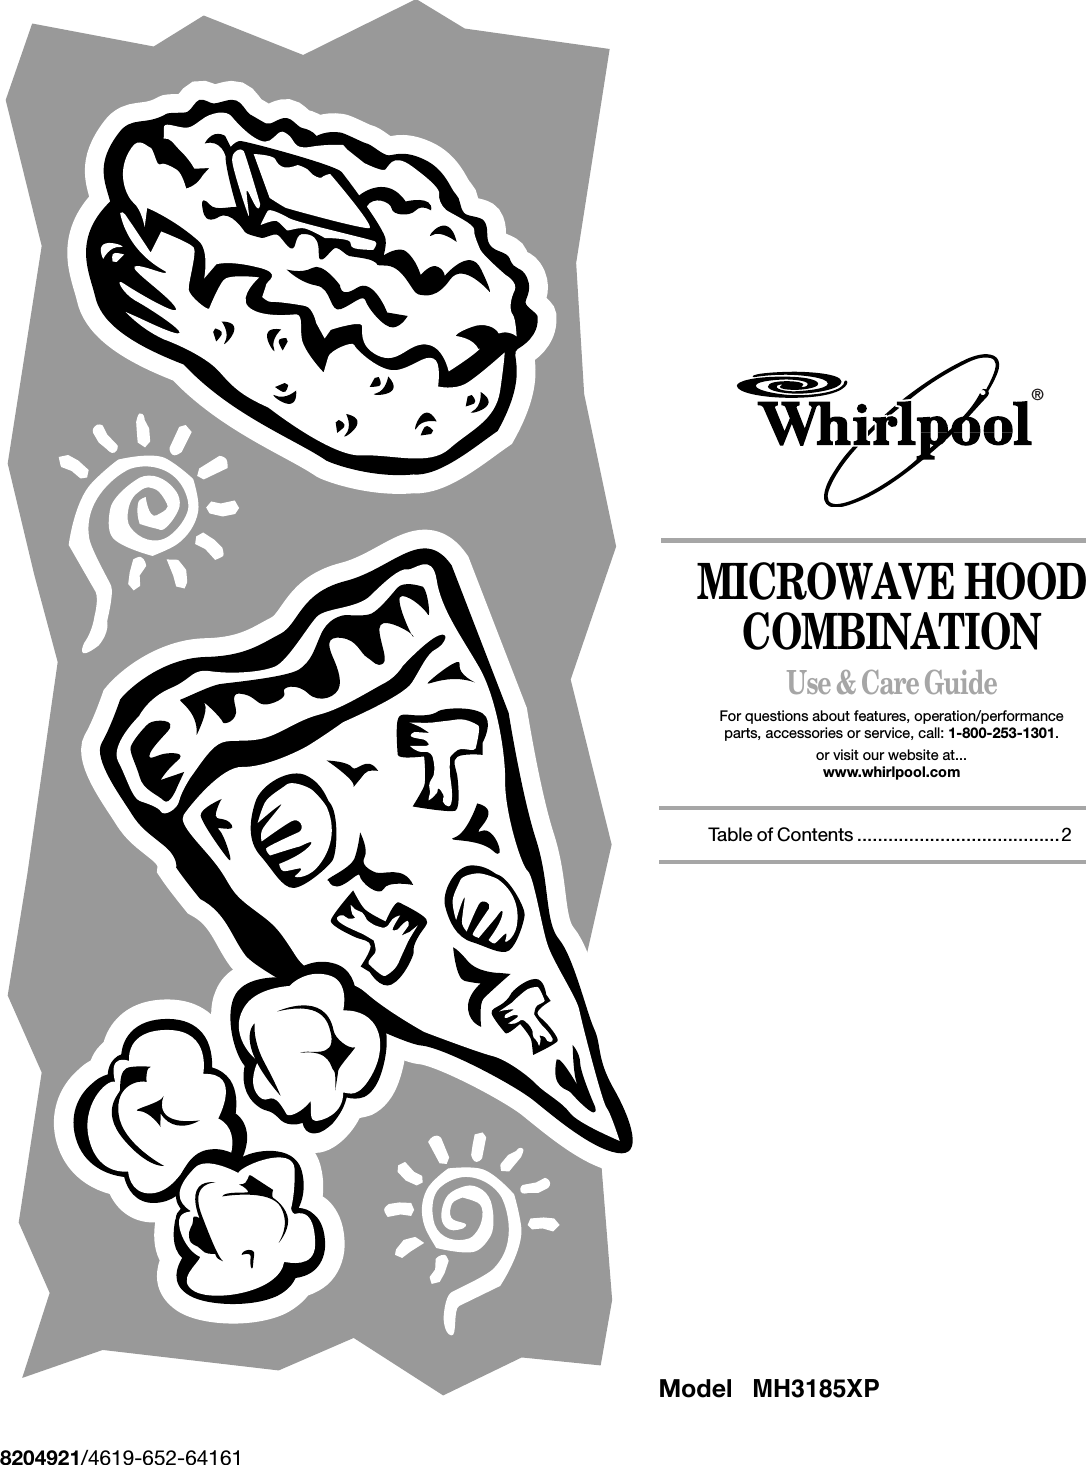 MICROWAVE HOOD COMBINATIONUse &amp; Care GuideFor questions about features, operation/performanceparts, accessories or service, call: 1-800-253-1301.or visit our website at...www.whirlpool.com      Table of Contents .......................................28204921/4619-652-64161®Model MH3185XP